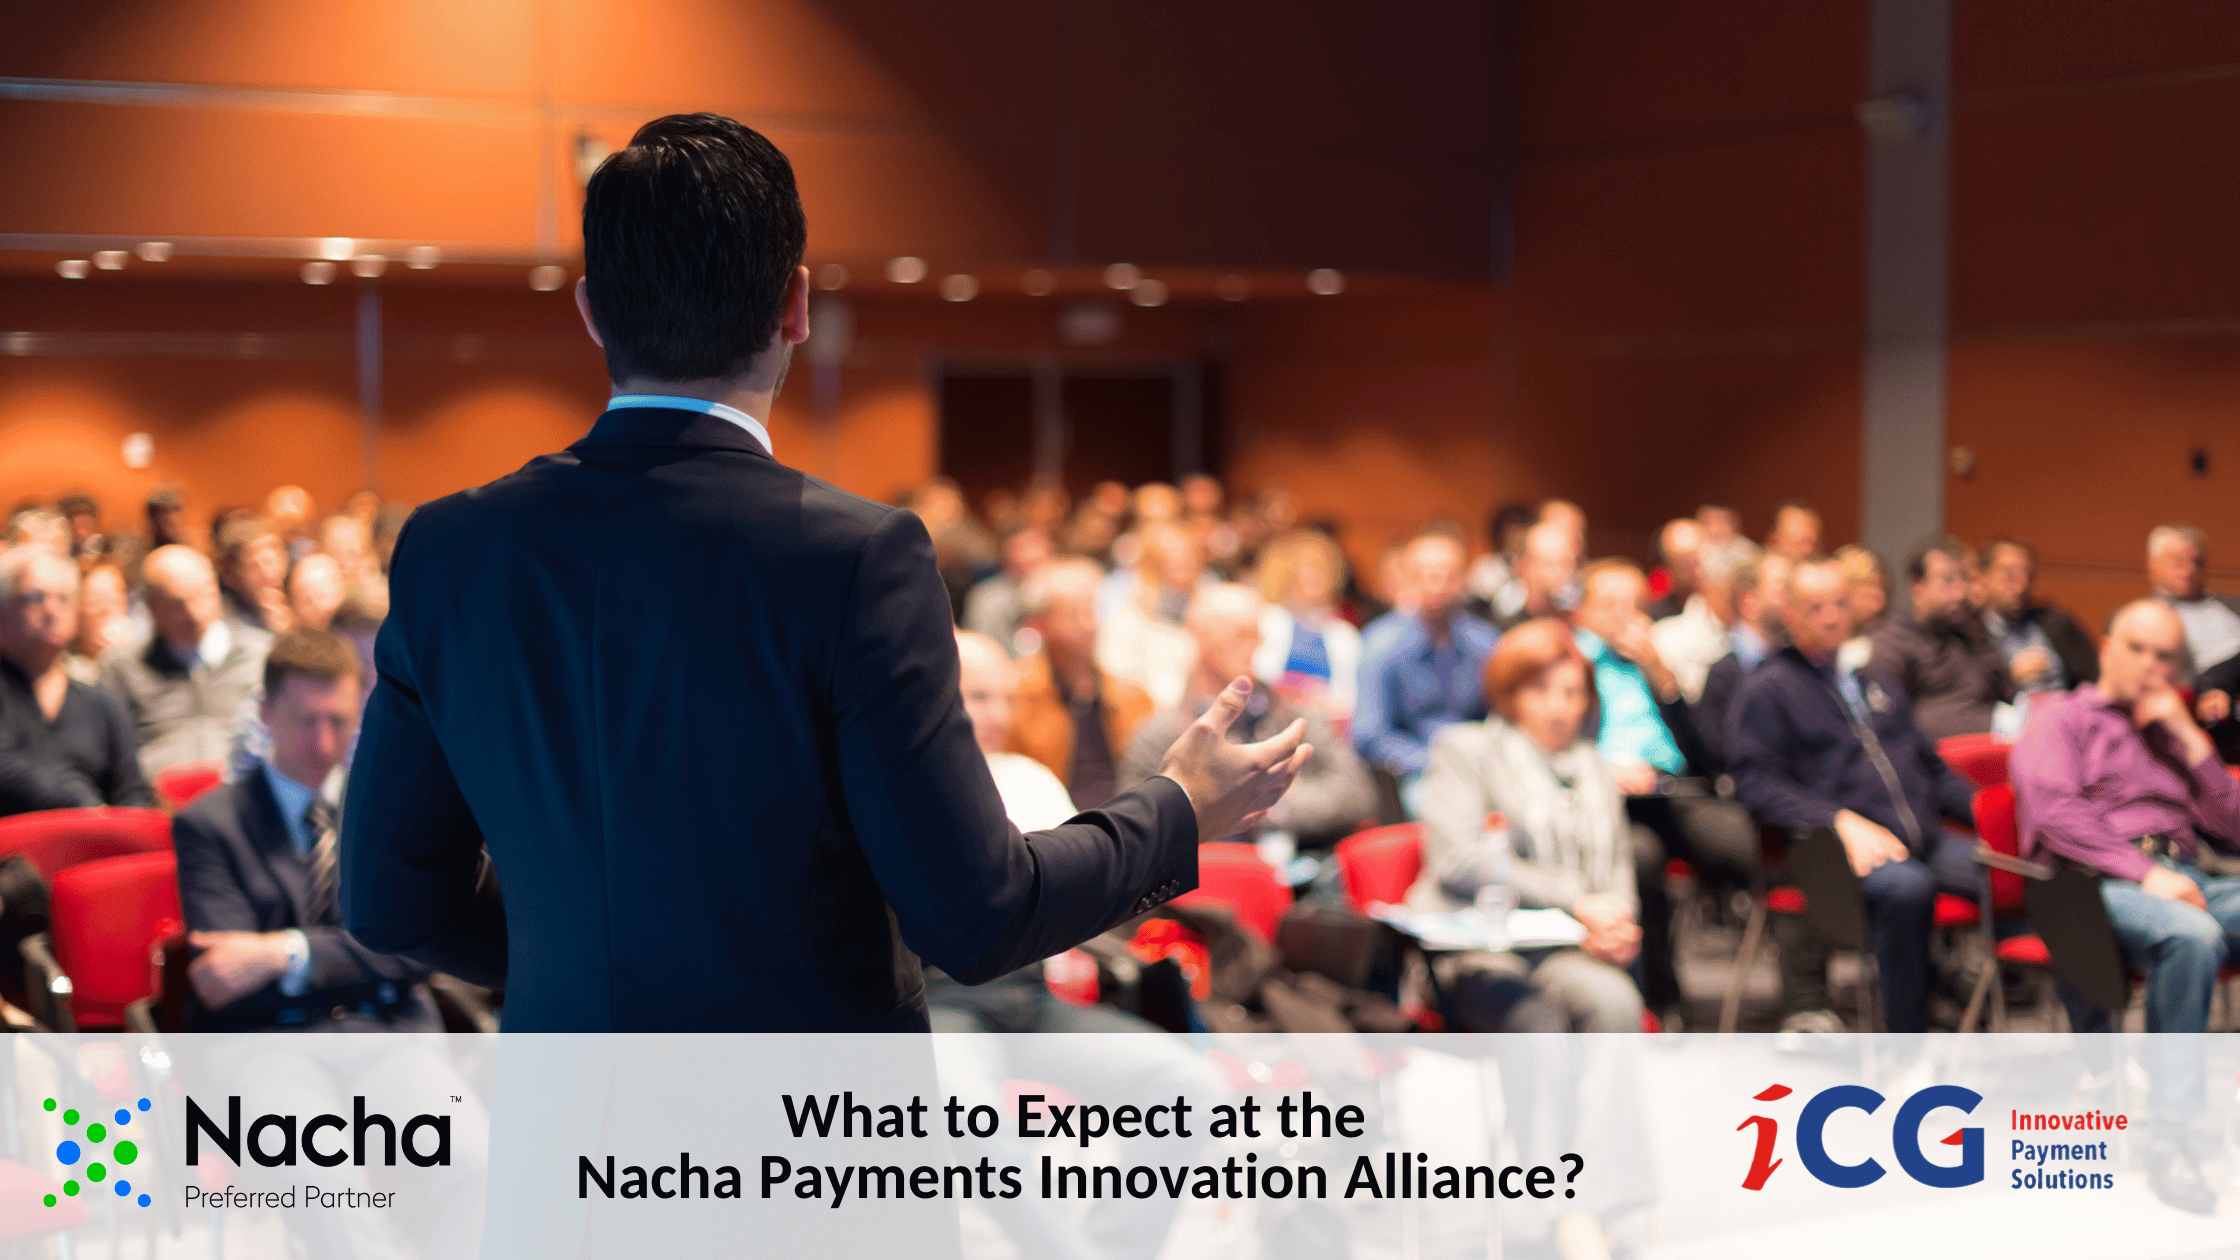 What to Expect at the Nacha Payments Innovation Alliance 2023